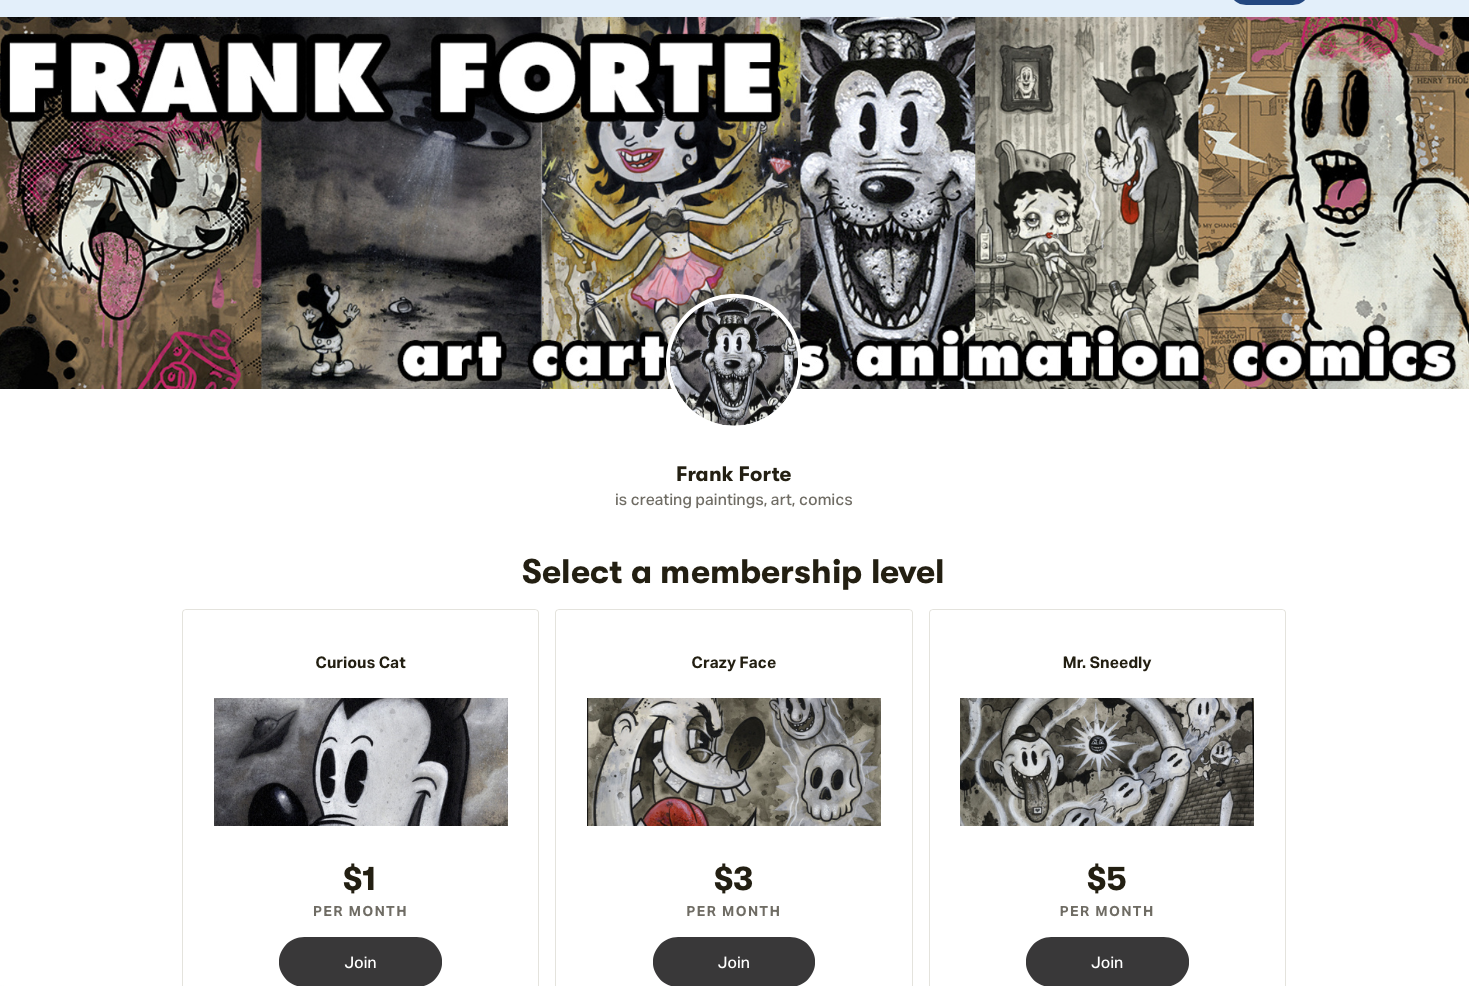 The Patreon of Frank Forte